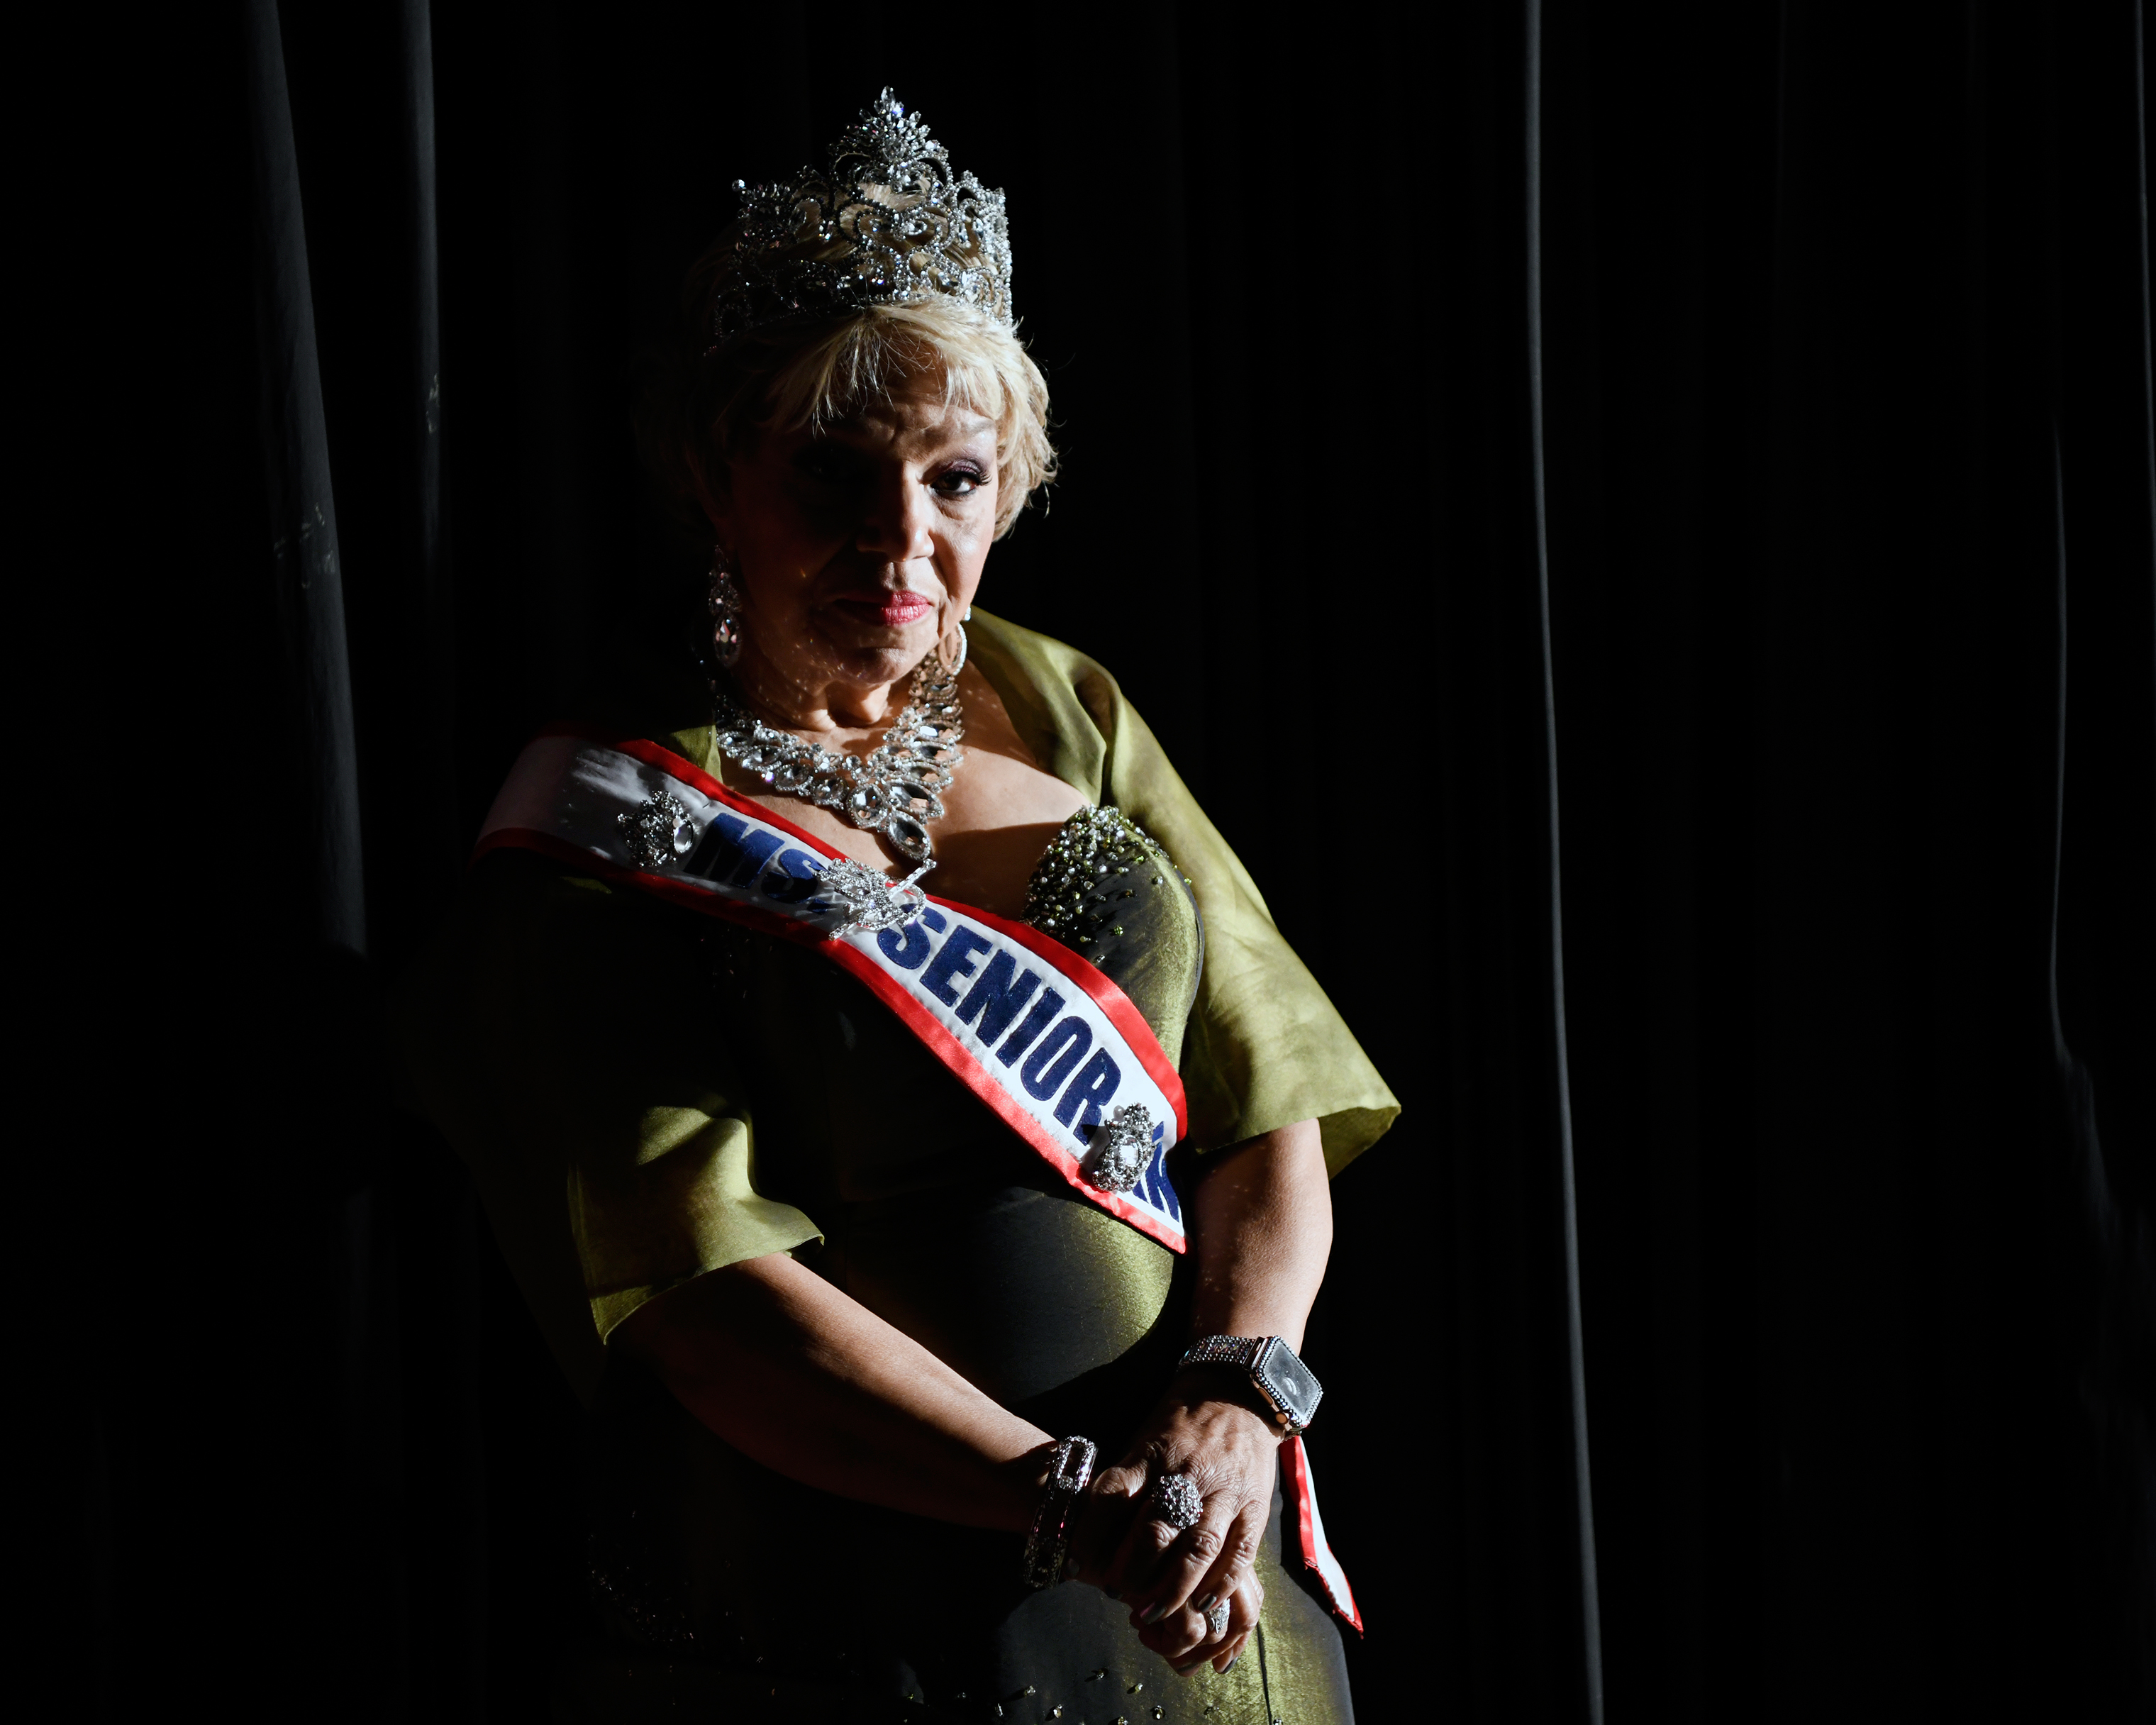 "It’s been an exciting, wonderful year. I would recommend it for anyone in my age group. It’s a once in a lifetime experience." Carolyn Slade Harden won the 2017 Ms. Senior America Pageant. (Rosa Polin for TIME)